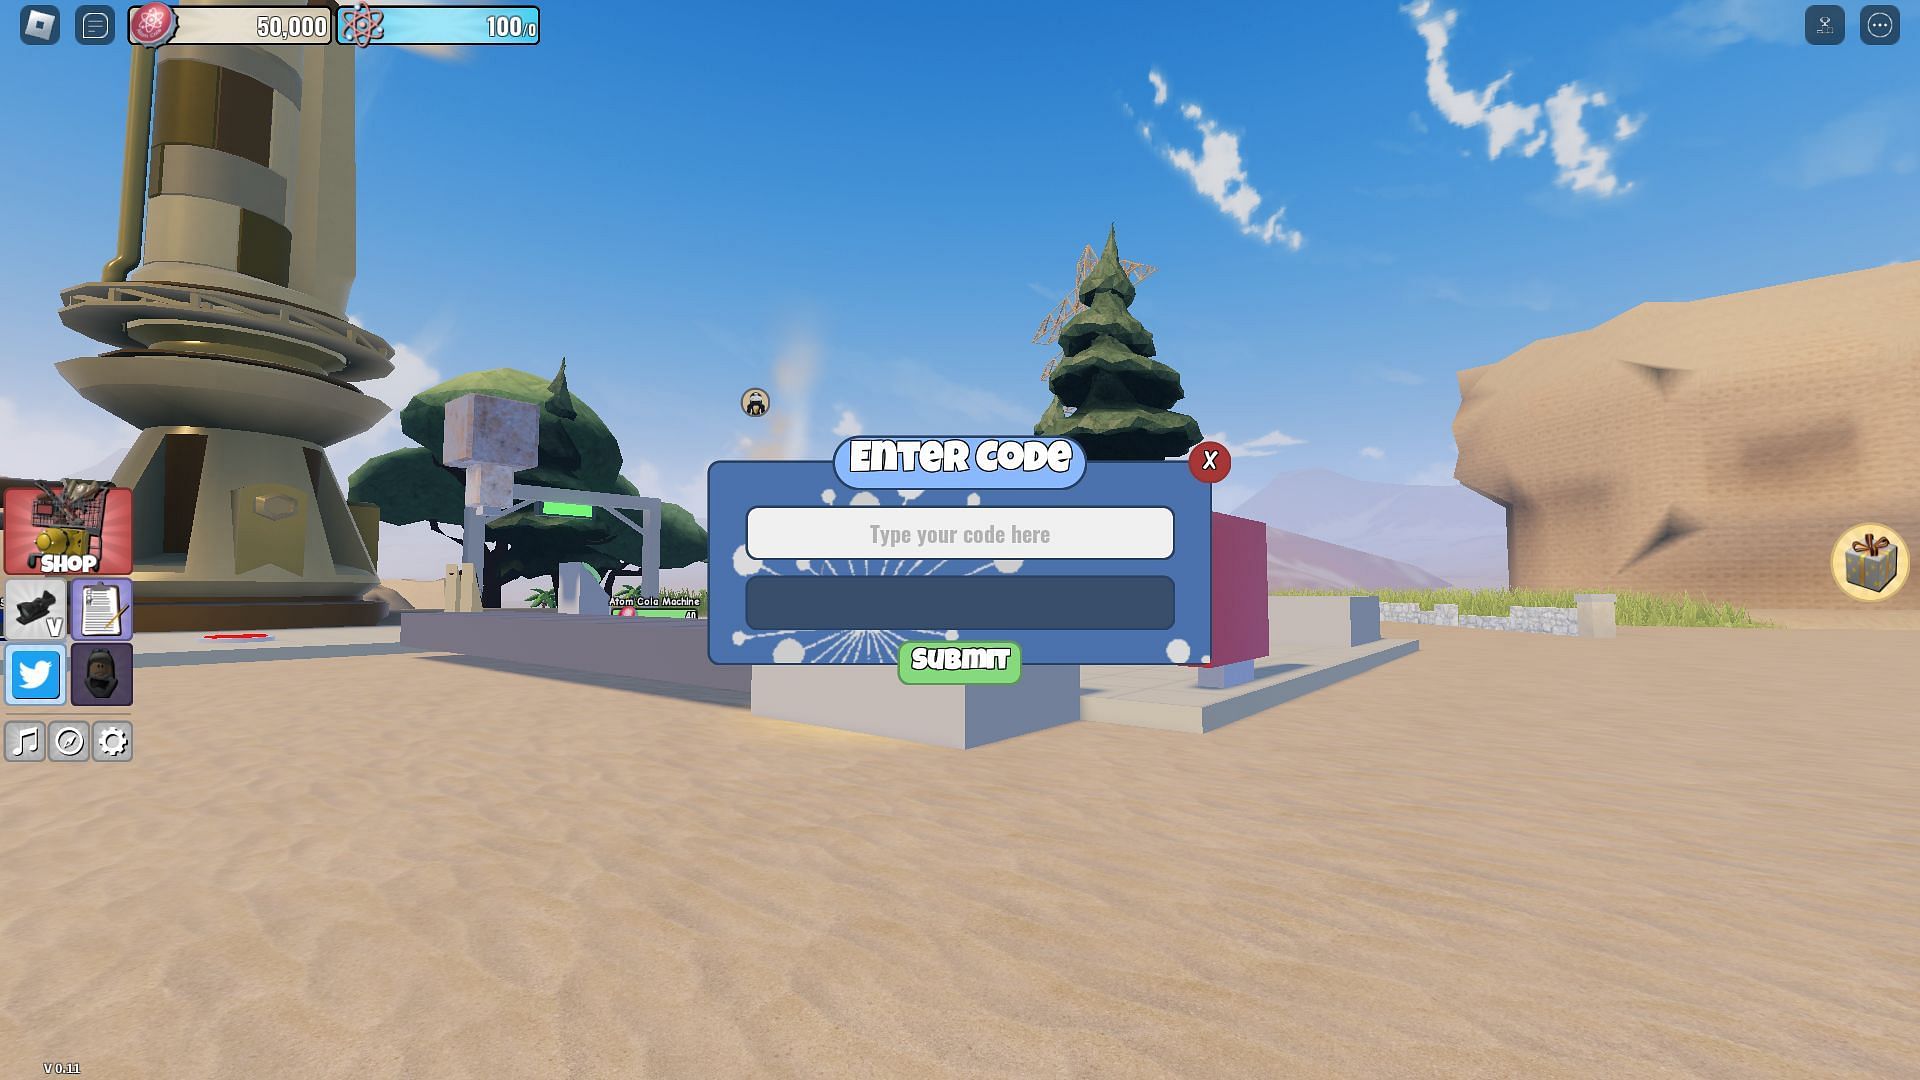 Active codes for Wasteland Tycoon (Image via Roblox)